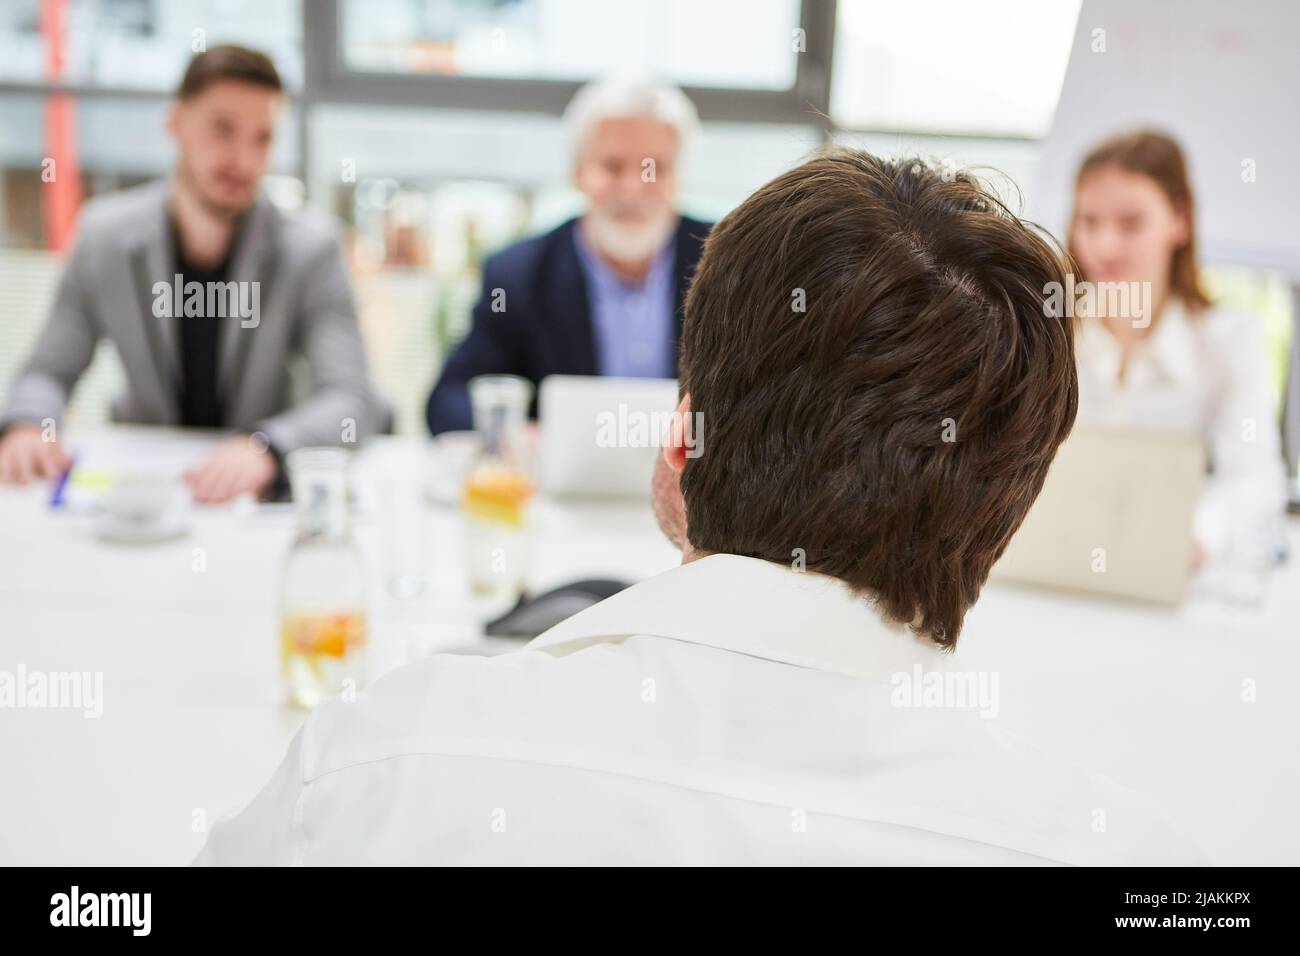 Man as applicant in job interview or job interview with employer Stock Photo